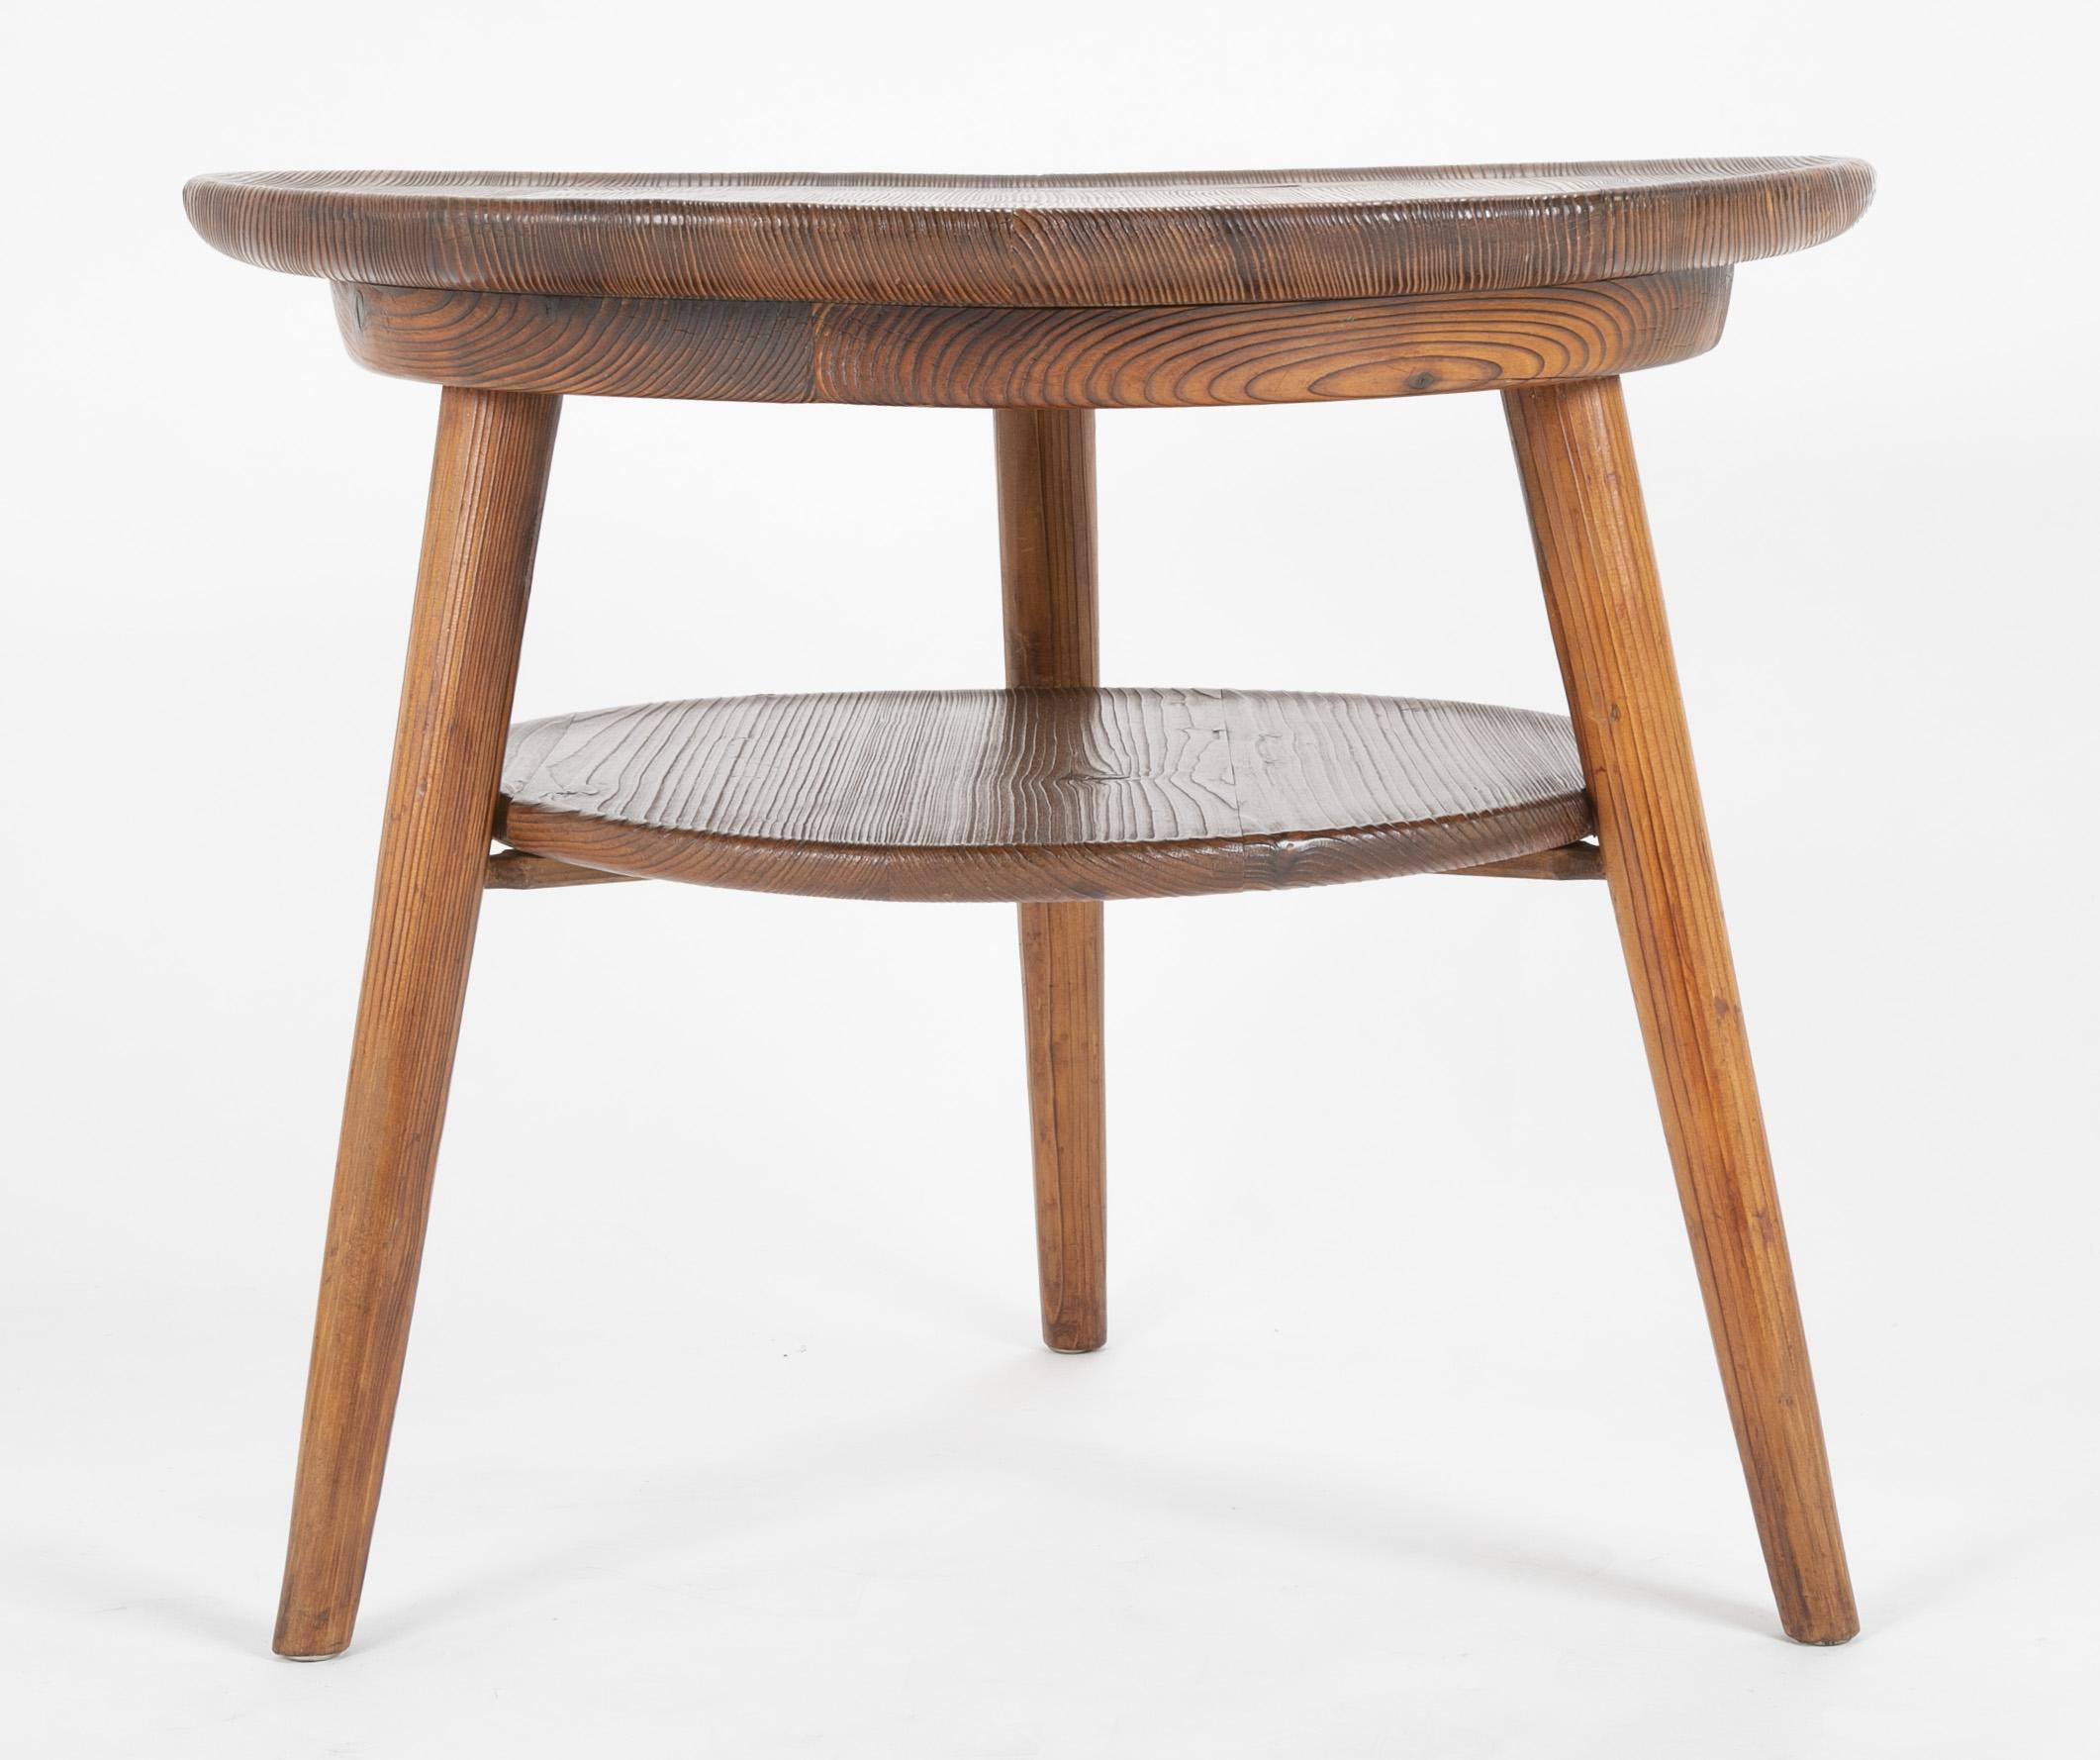 An interesting side table or center table designed by Andre Sornay. The fir has been treated in the Japanese technique shou sugi ban, in which the wood is first burned and then scraped making the 